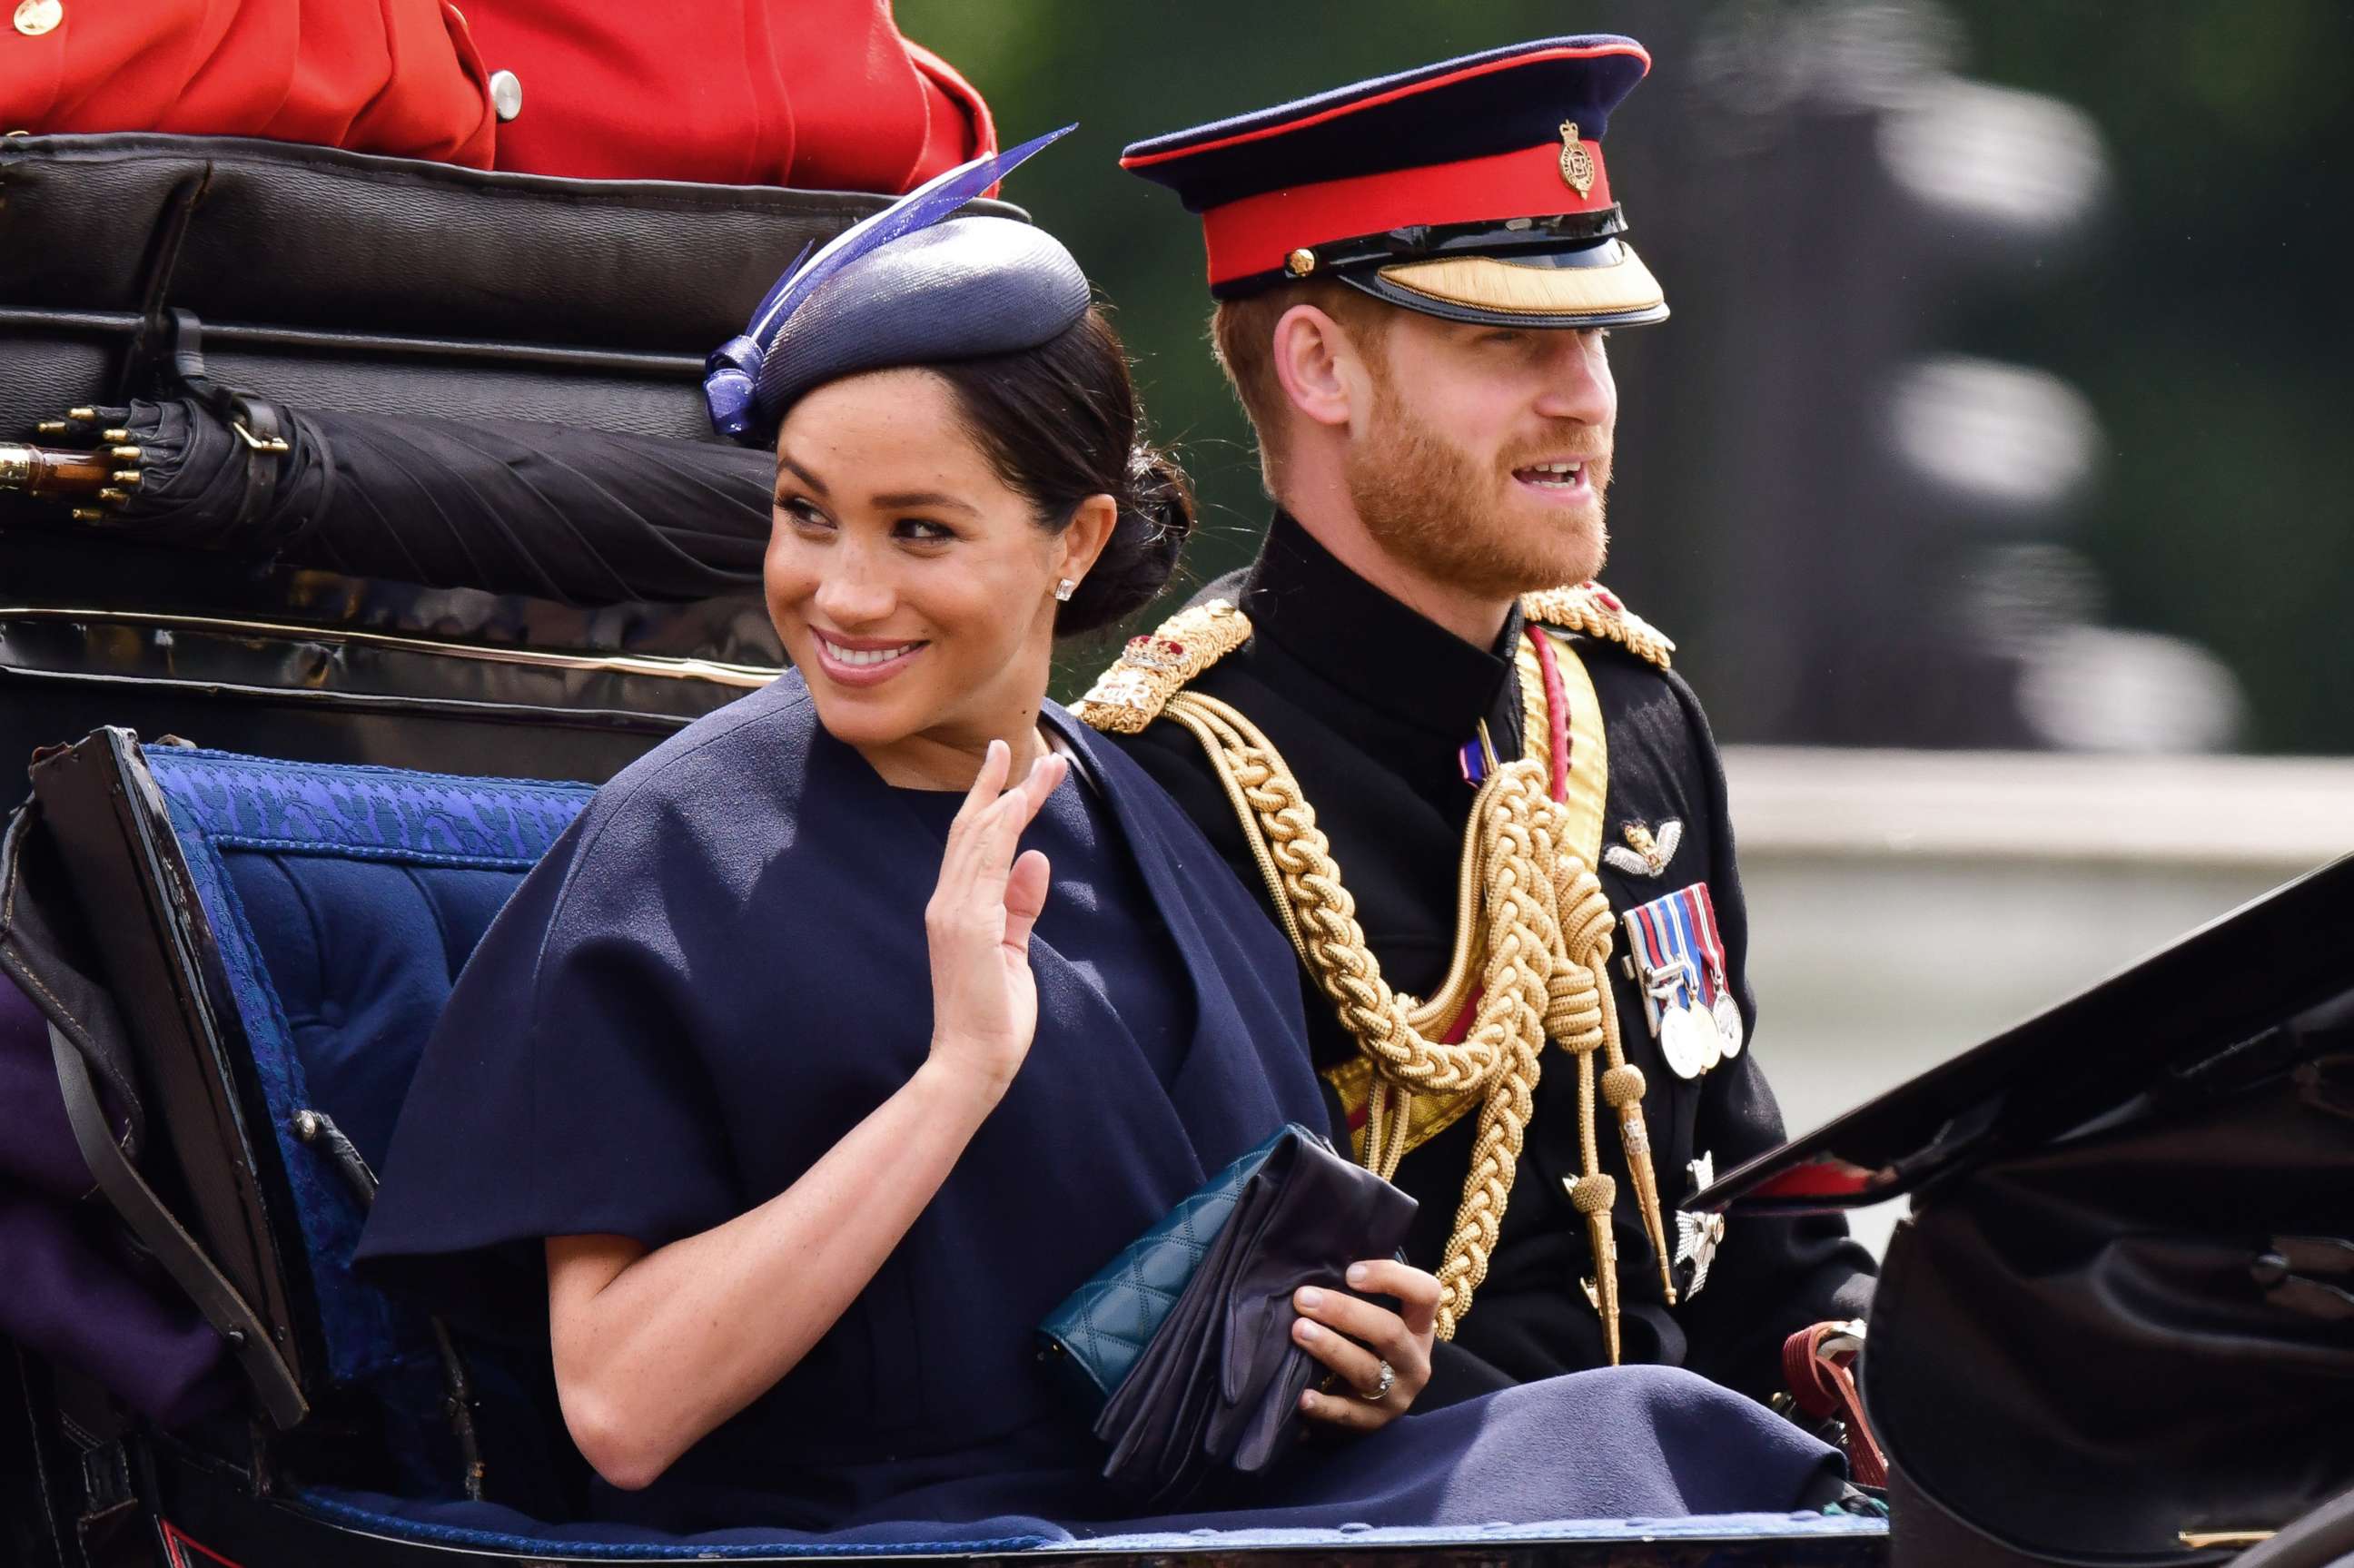 PHOTO: Meghan, Duchess of Sussex and Prince Harry, Duke of Sussex leave Buckingham Palace in a carriage during Trooping The Colour, the Queen's annual birthday parade, on June 8, 2019 in London.